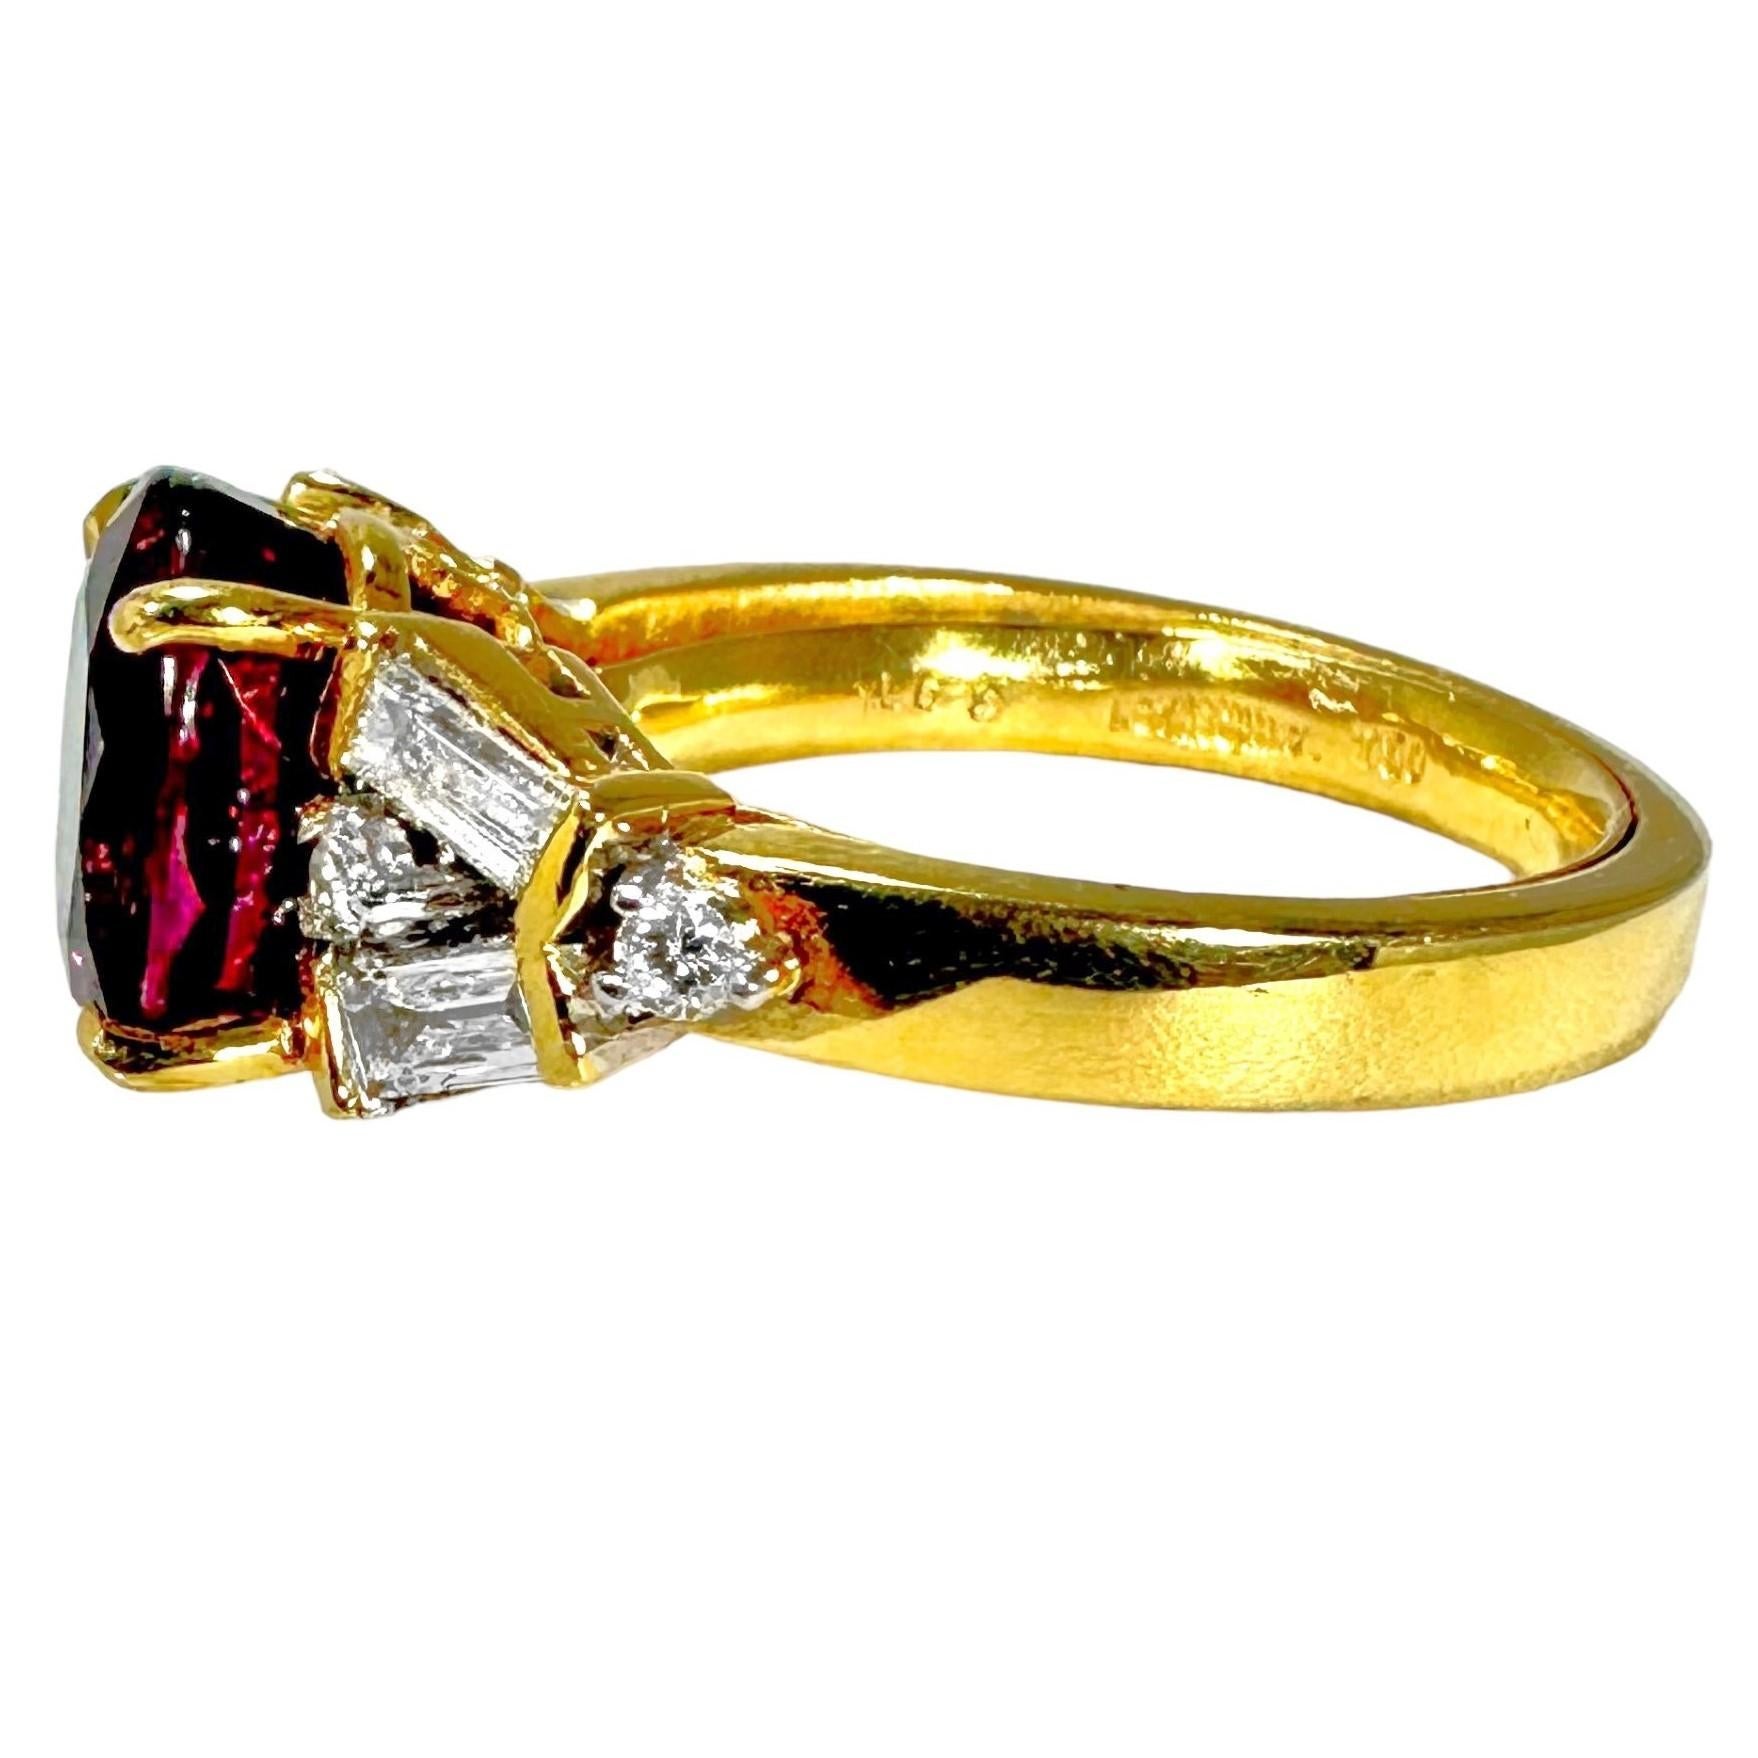 18k Yellow Gold Ring with 4.76ct Red Wine Colored, Oval Shaped Garnet & Diamonds For Sale 1